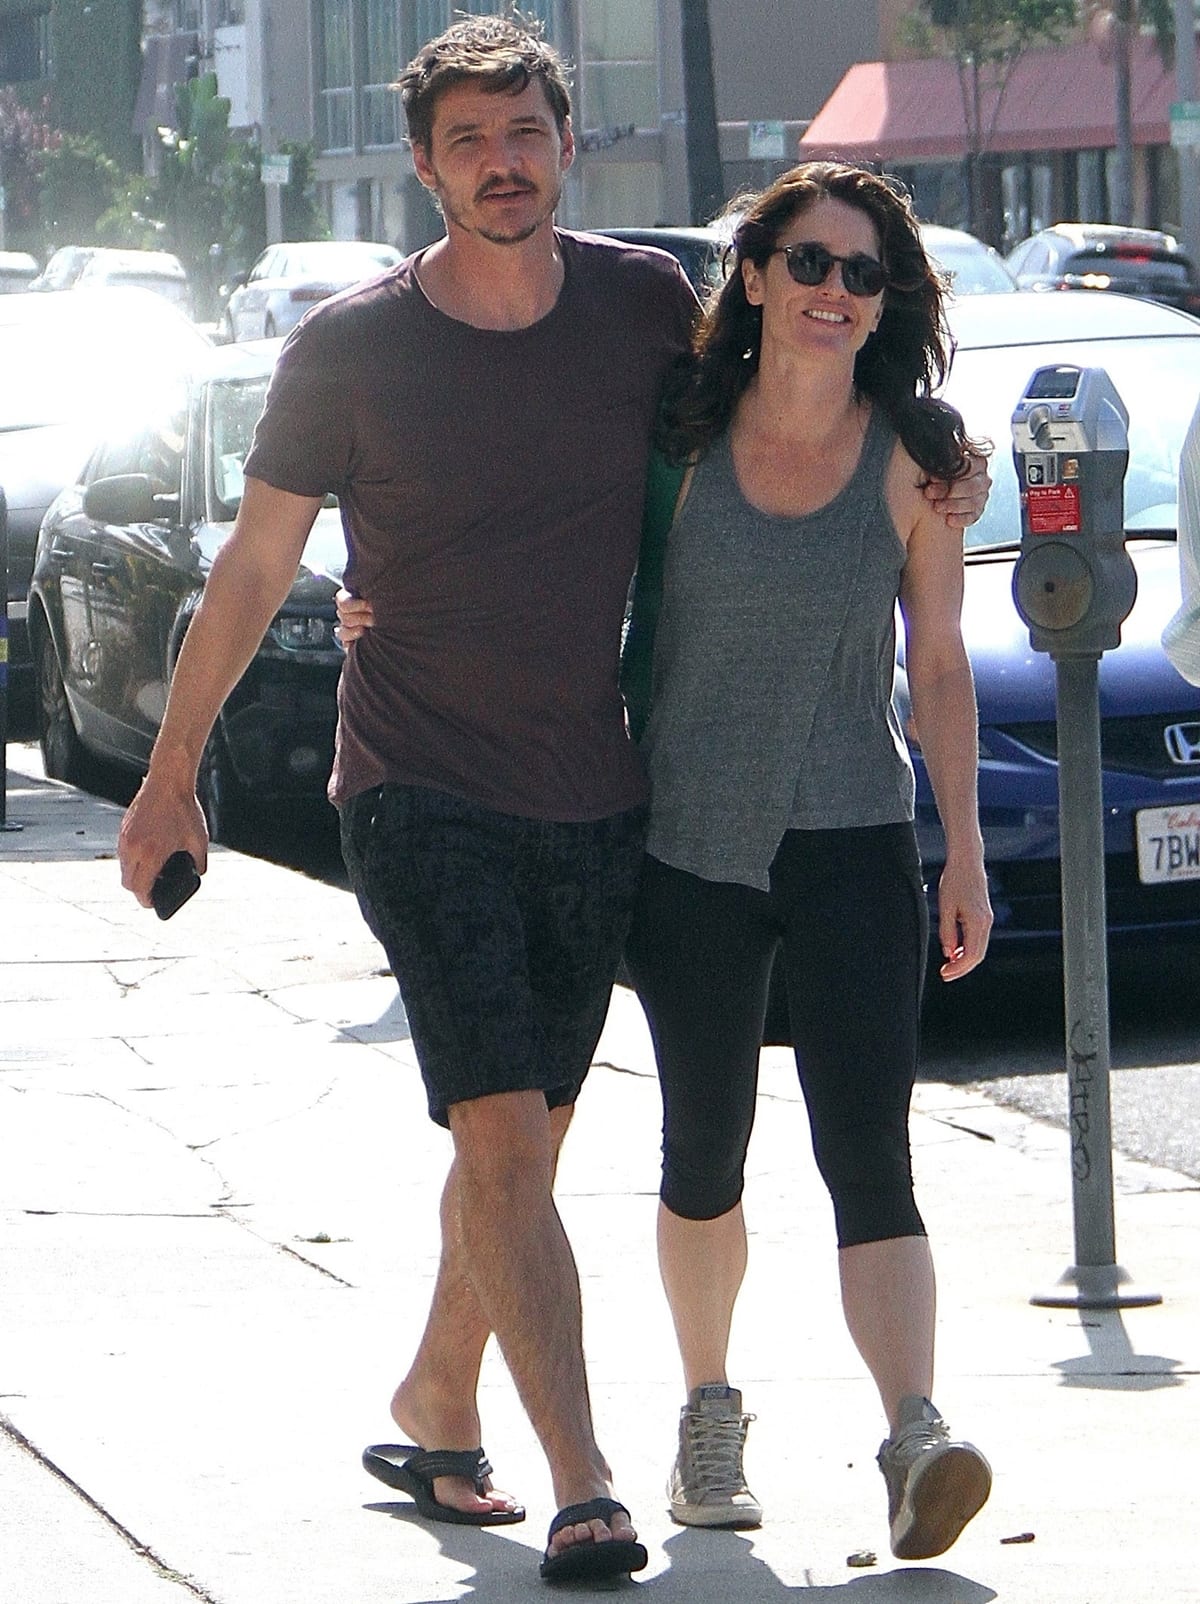 Game of Thrones star Pedro Pascal and Robin Tunney of The Mentalist a romantic stroll